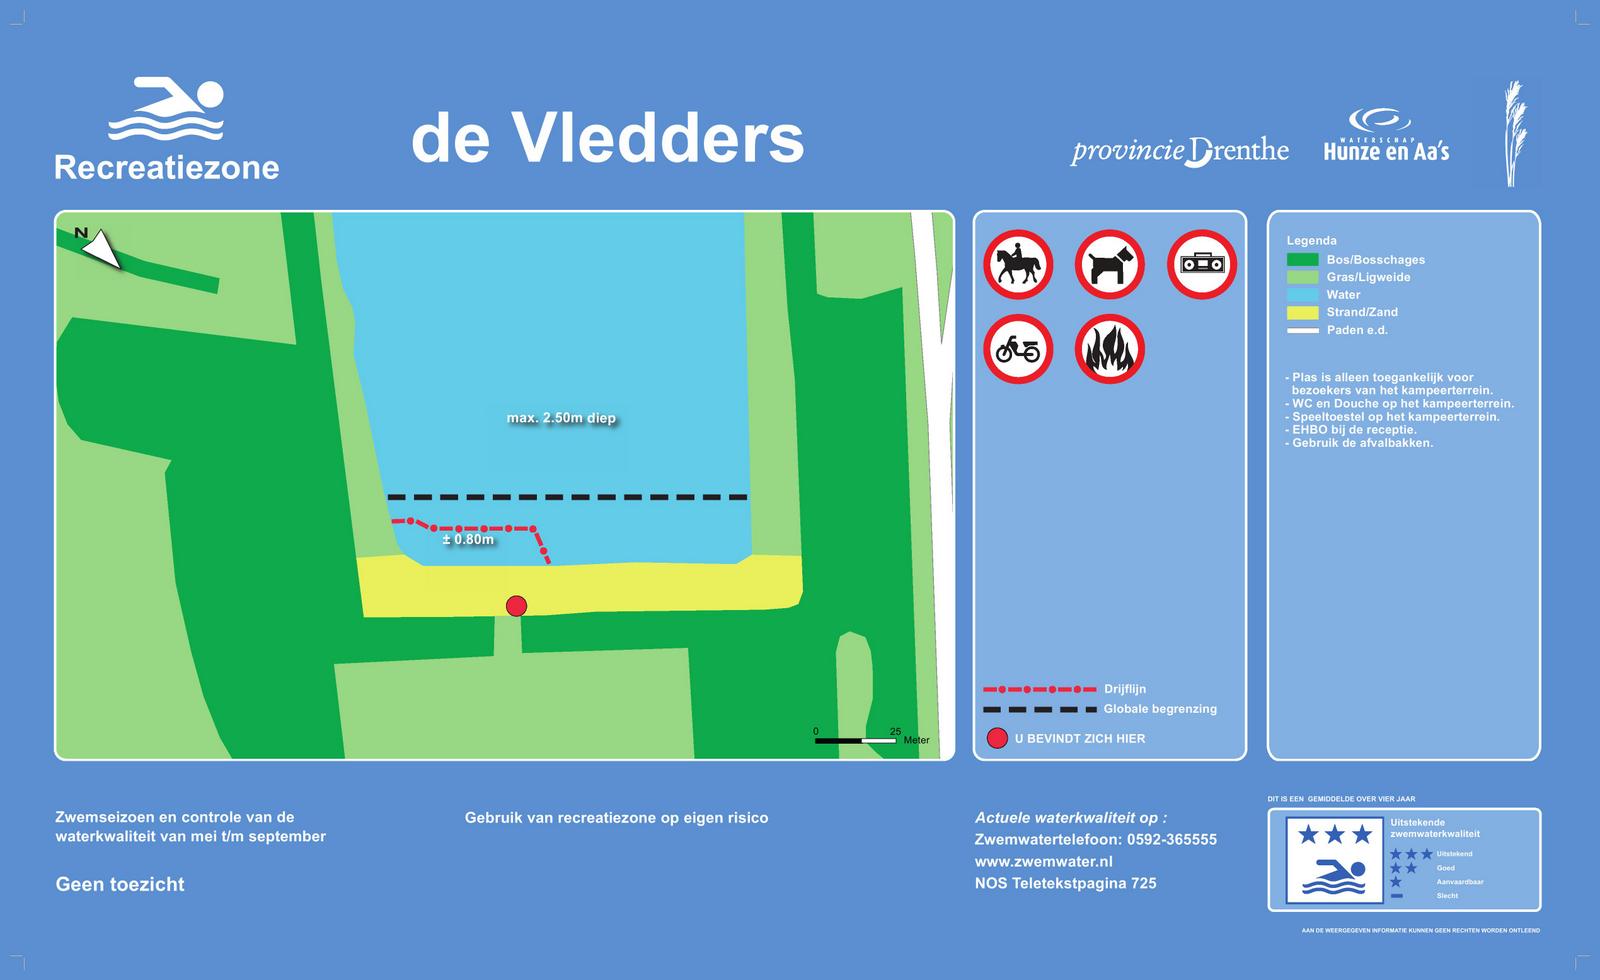 The information board at the swimming location De Vledders